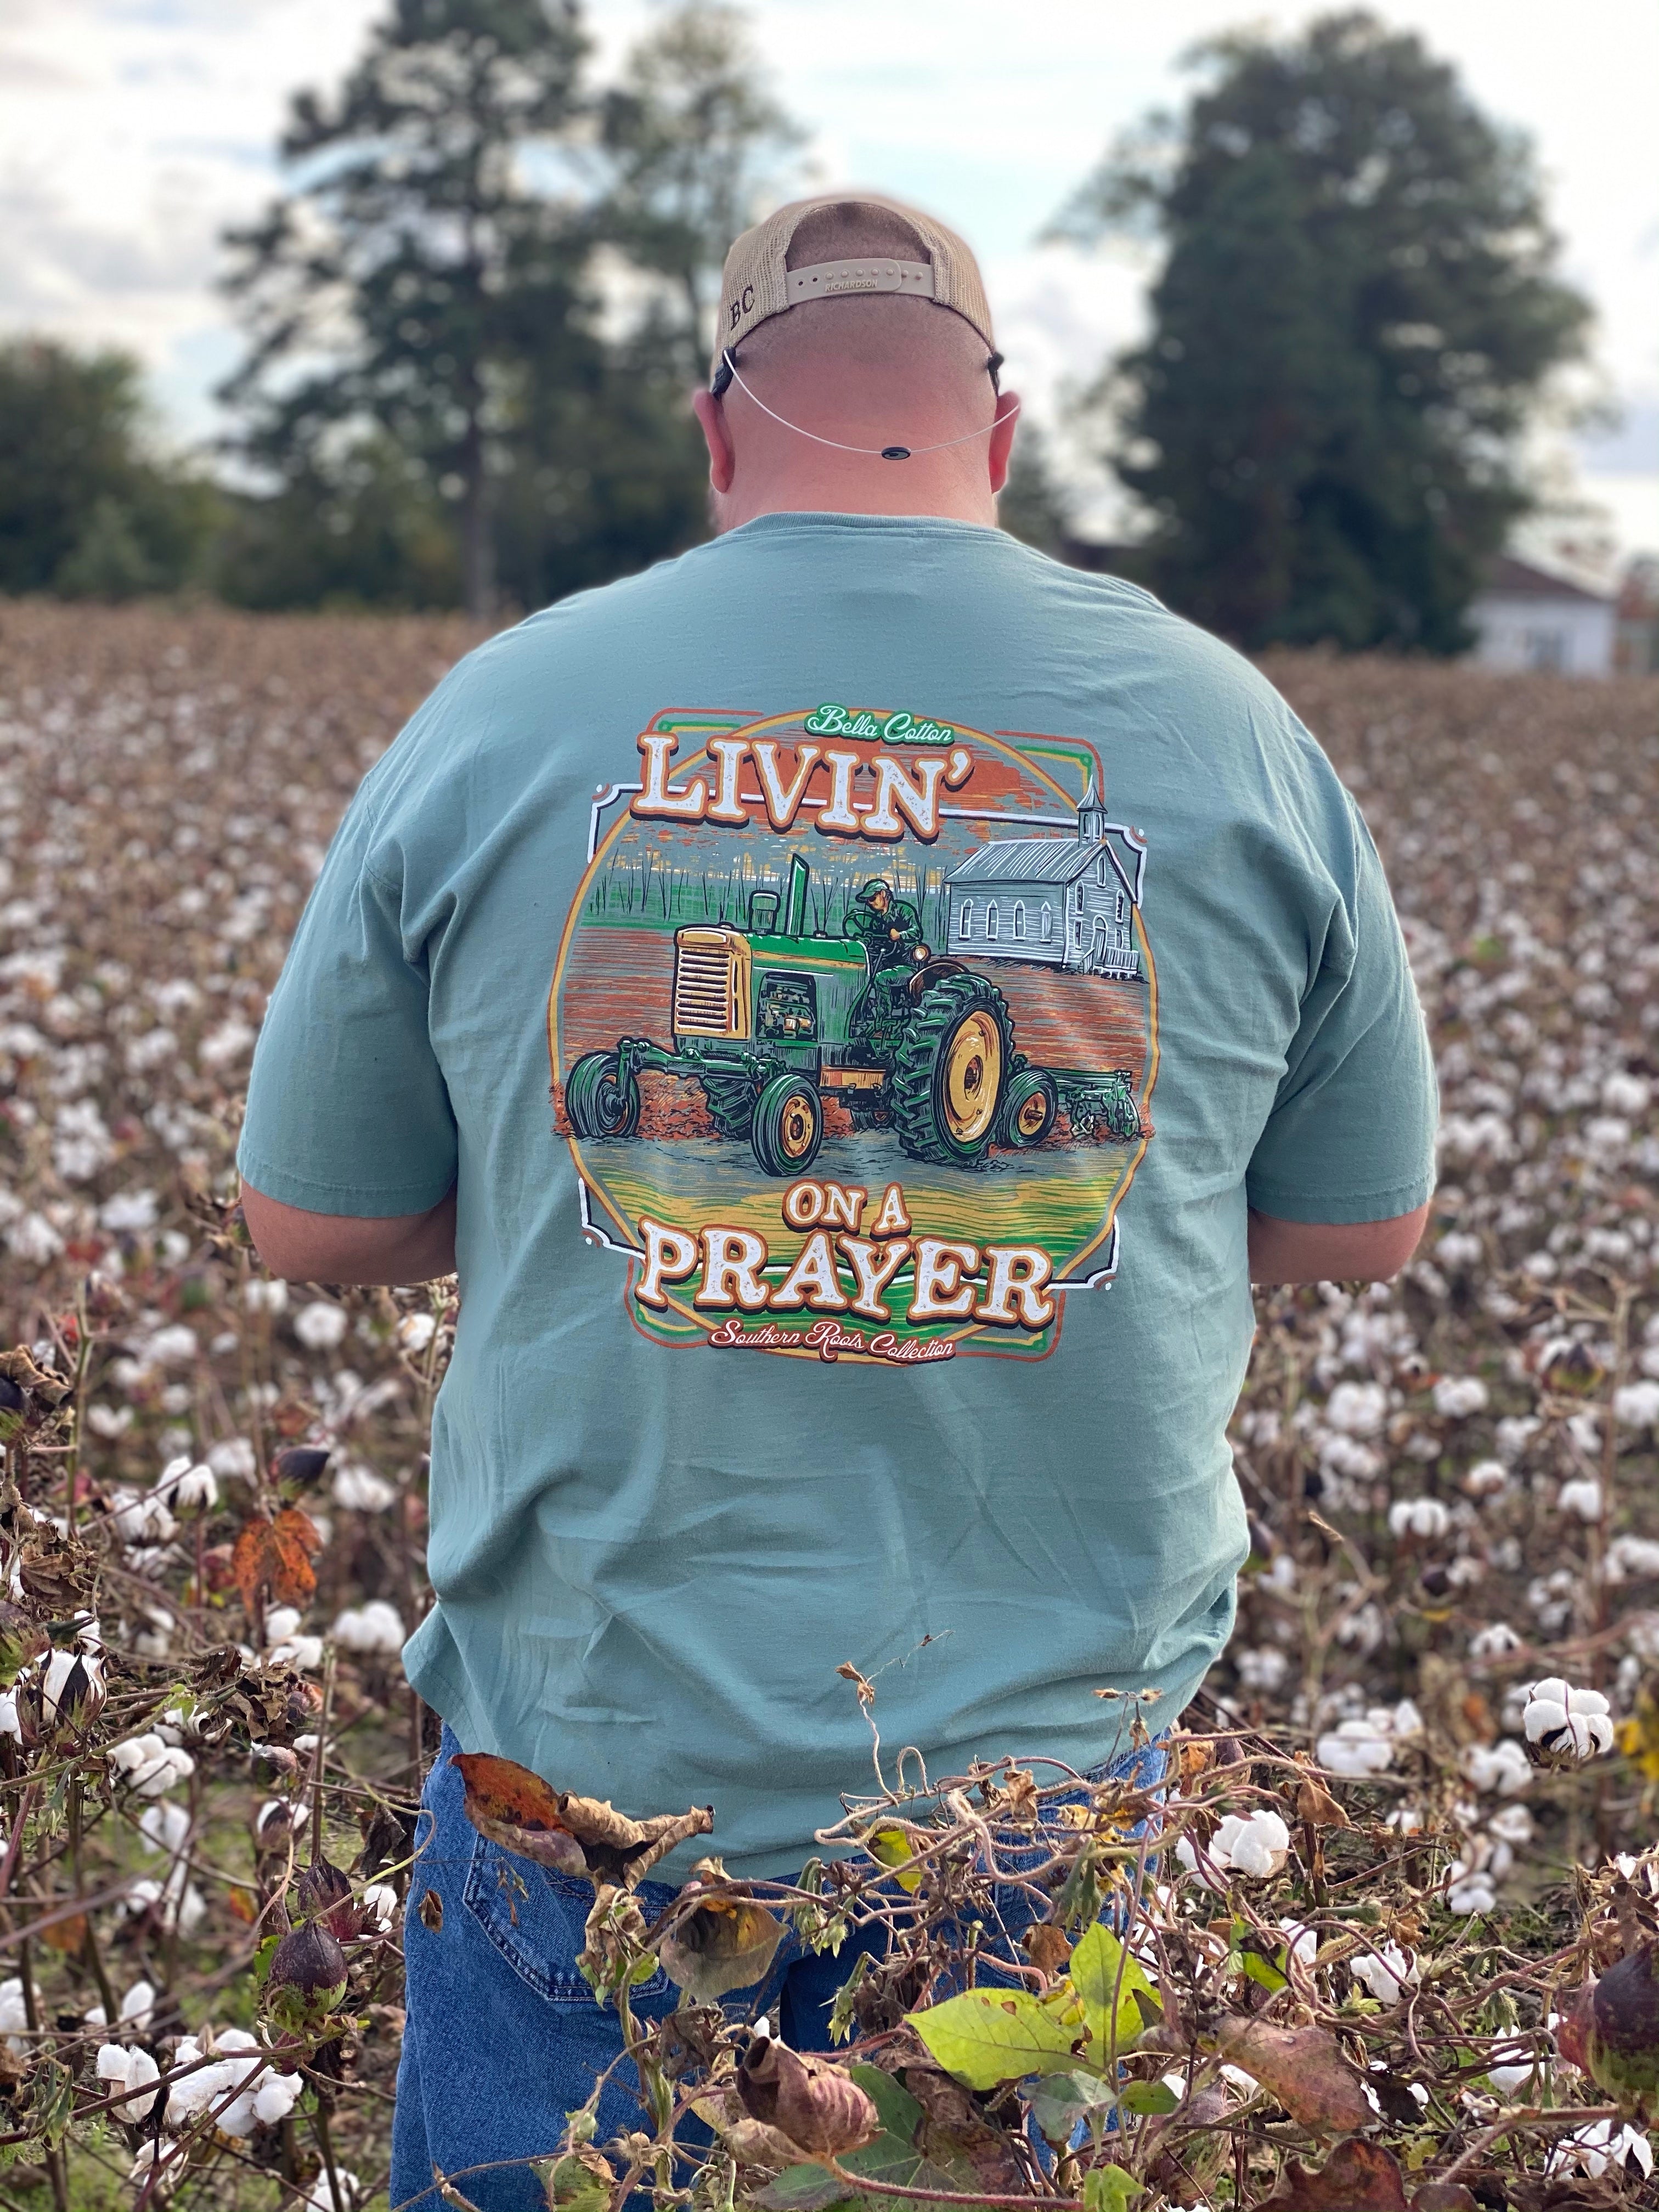 "Livin' on a Prayer" green short sleeve shirt with tractor image.